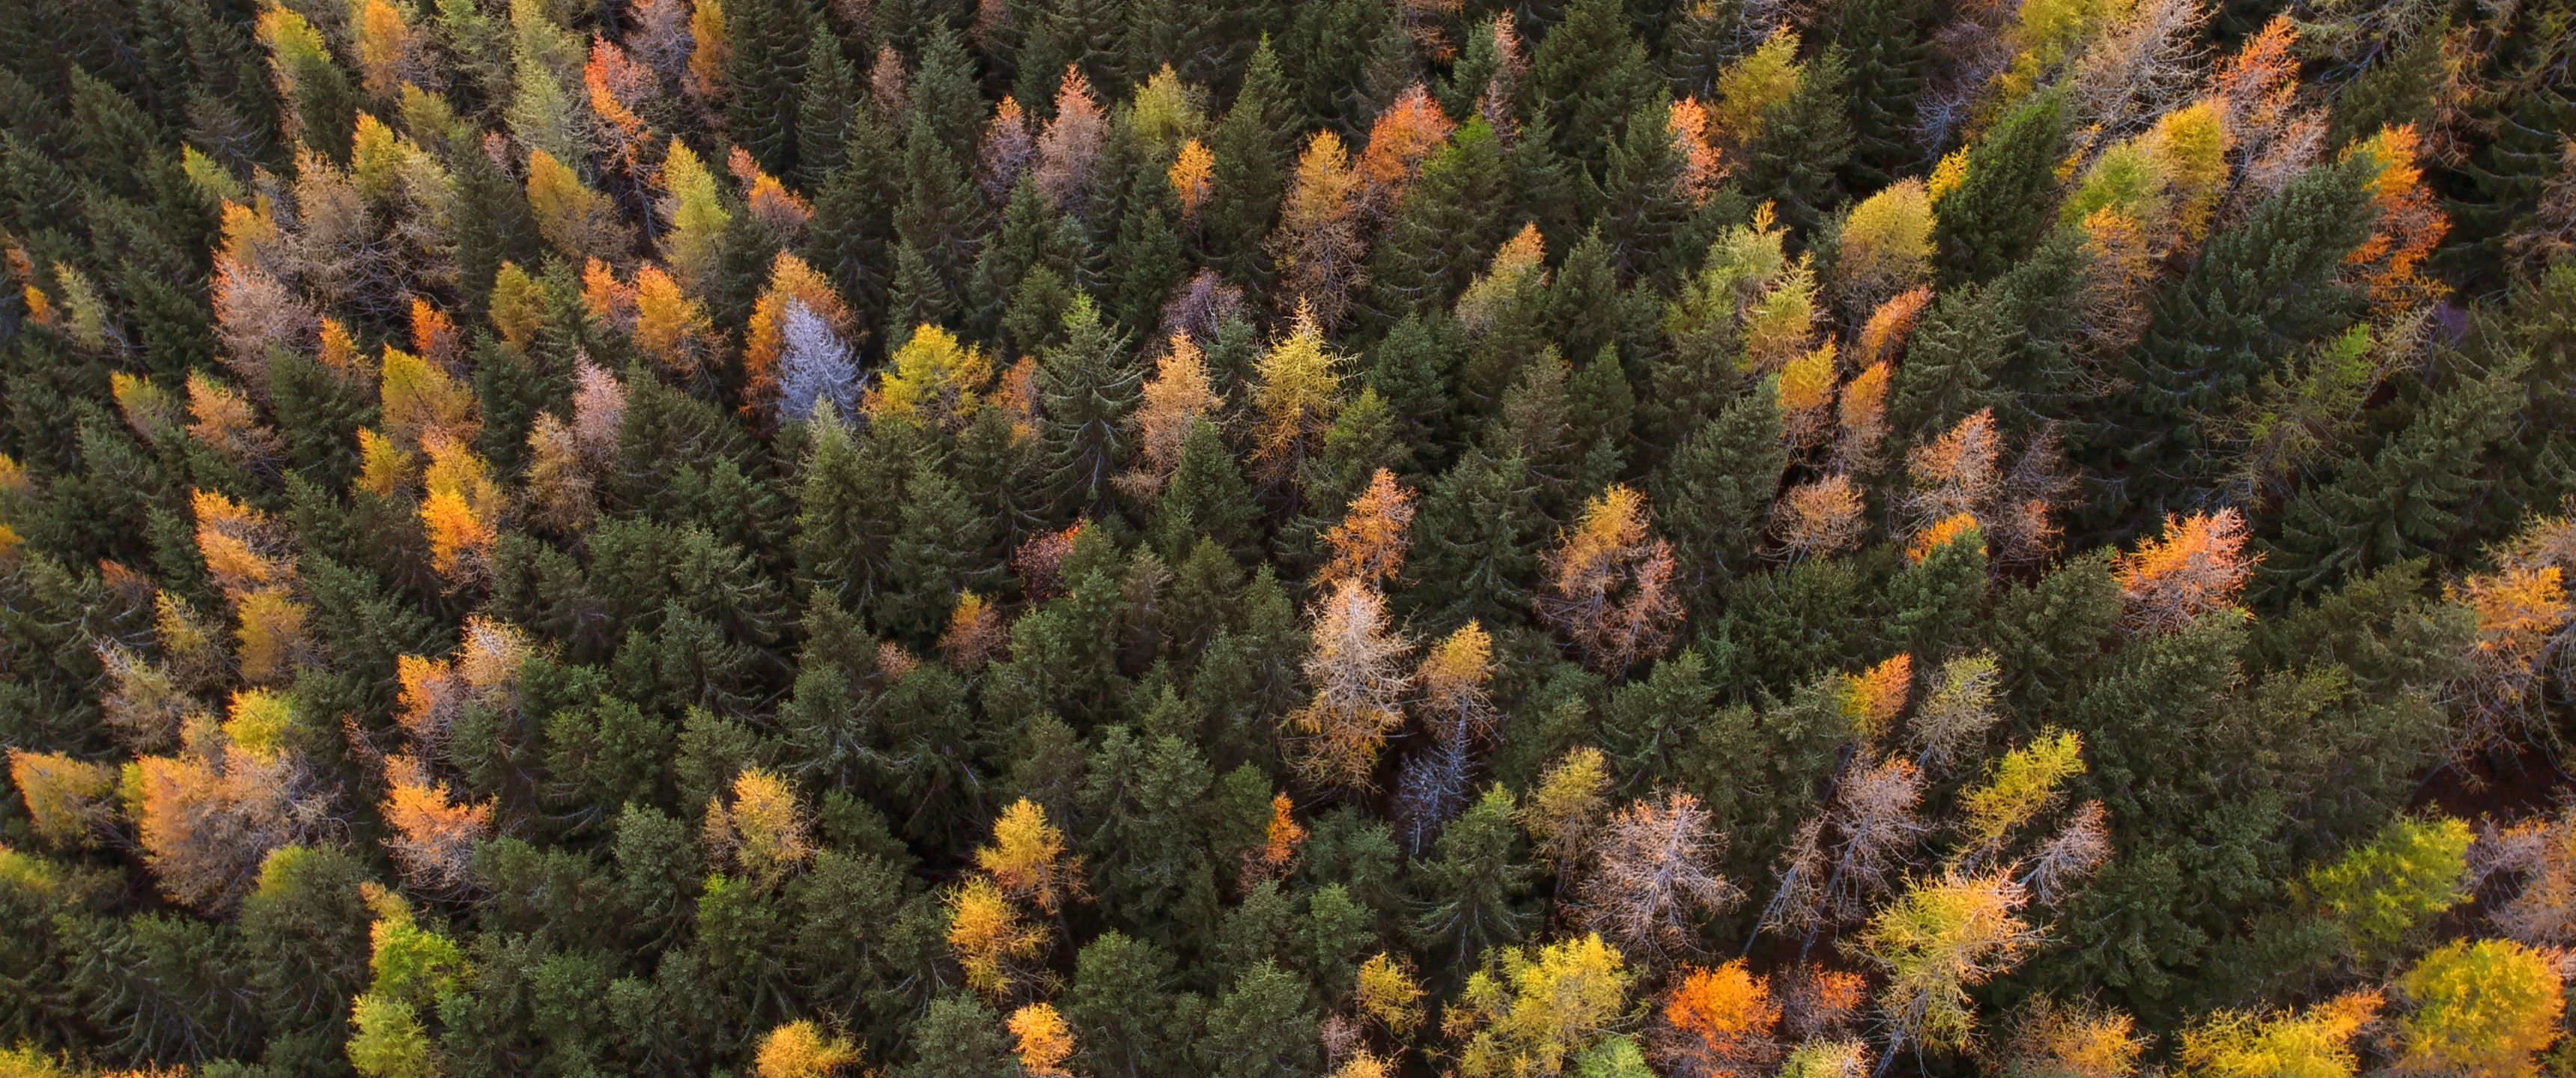 Download 3440x1440 Forest, Trees, Fall, Autumn, Top View Wallpaper